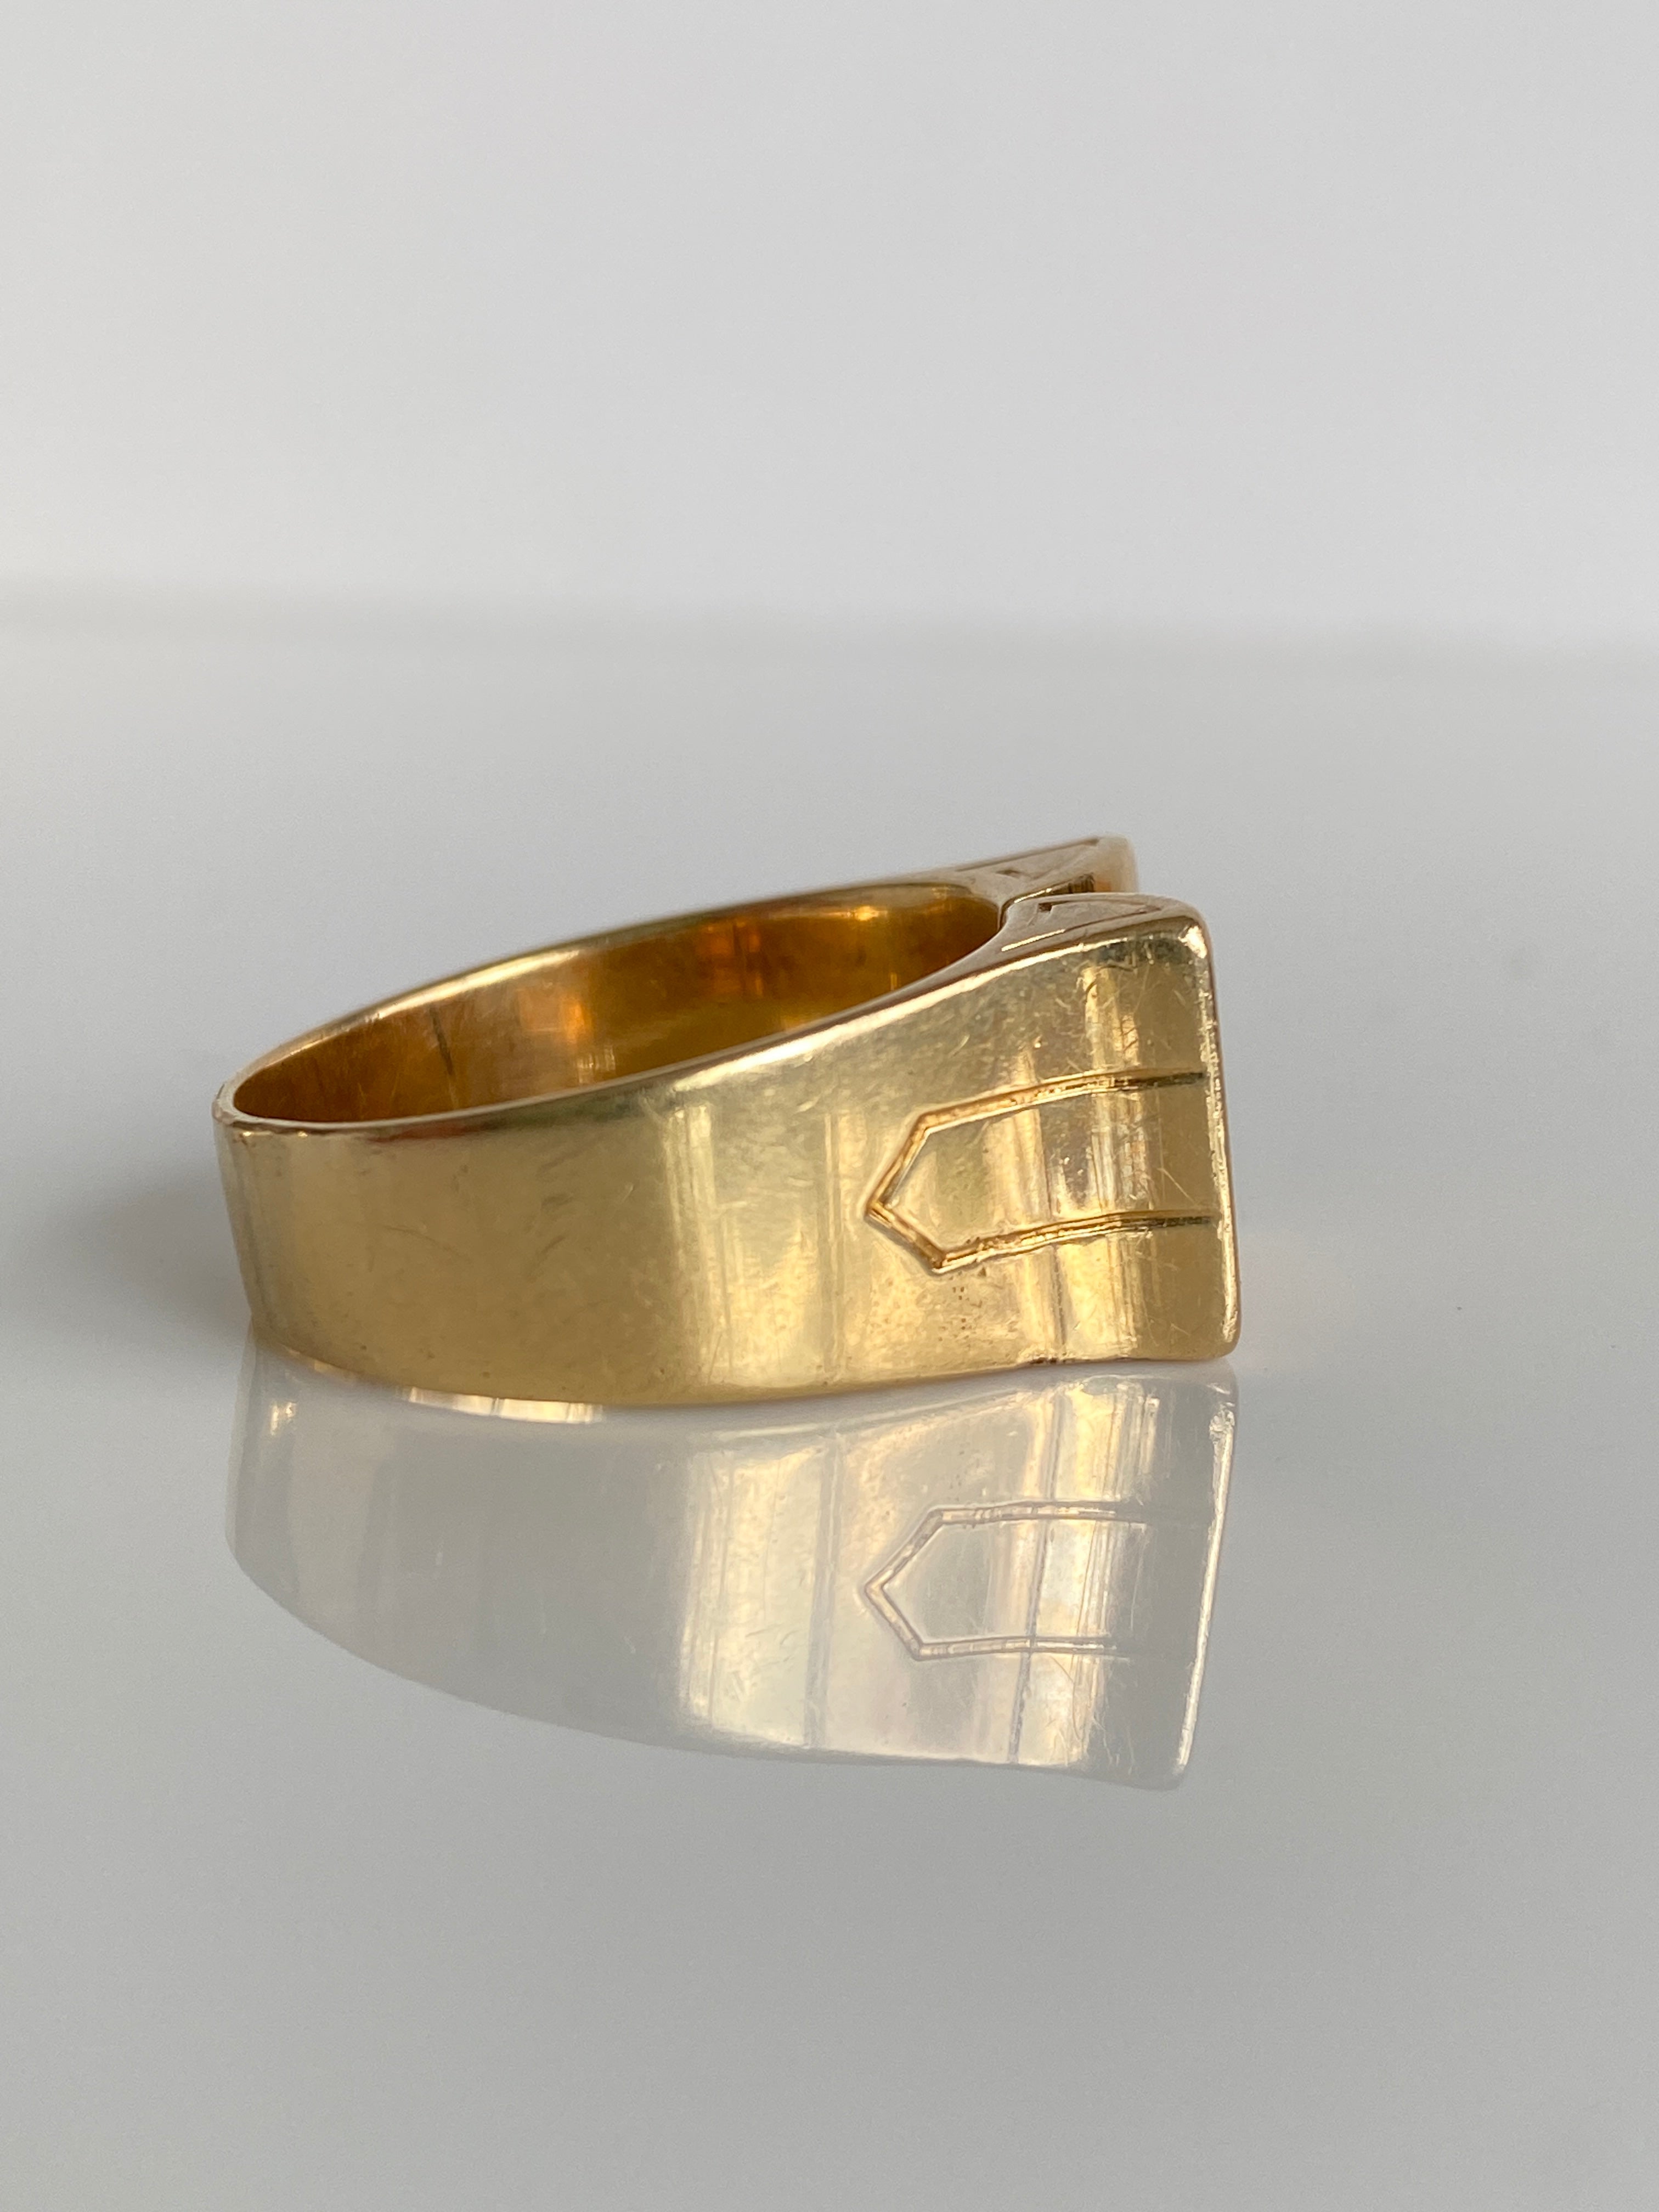 Gold & Diamond Cocktail Ring, 1940s